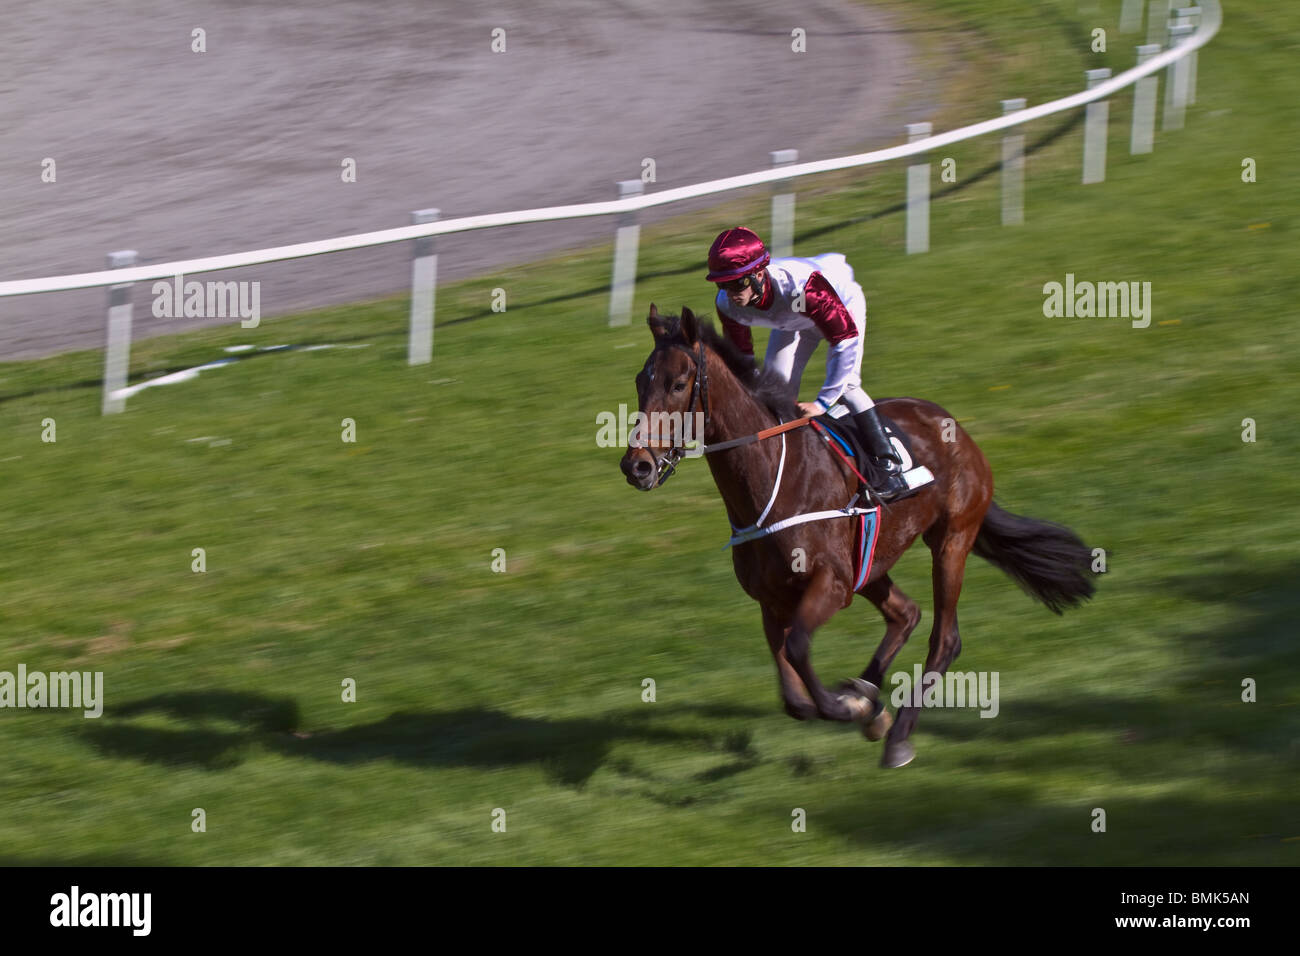 Leading gallop horse and jockey against motion blurred background. Horizontal Stock Photo